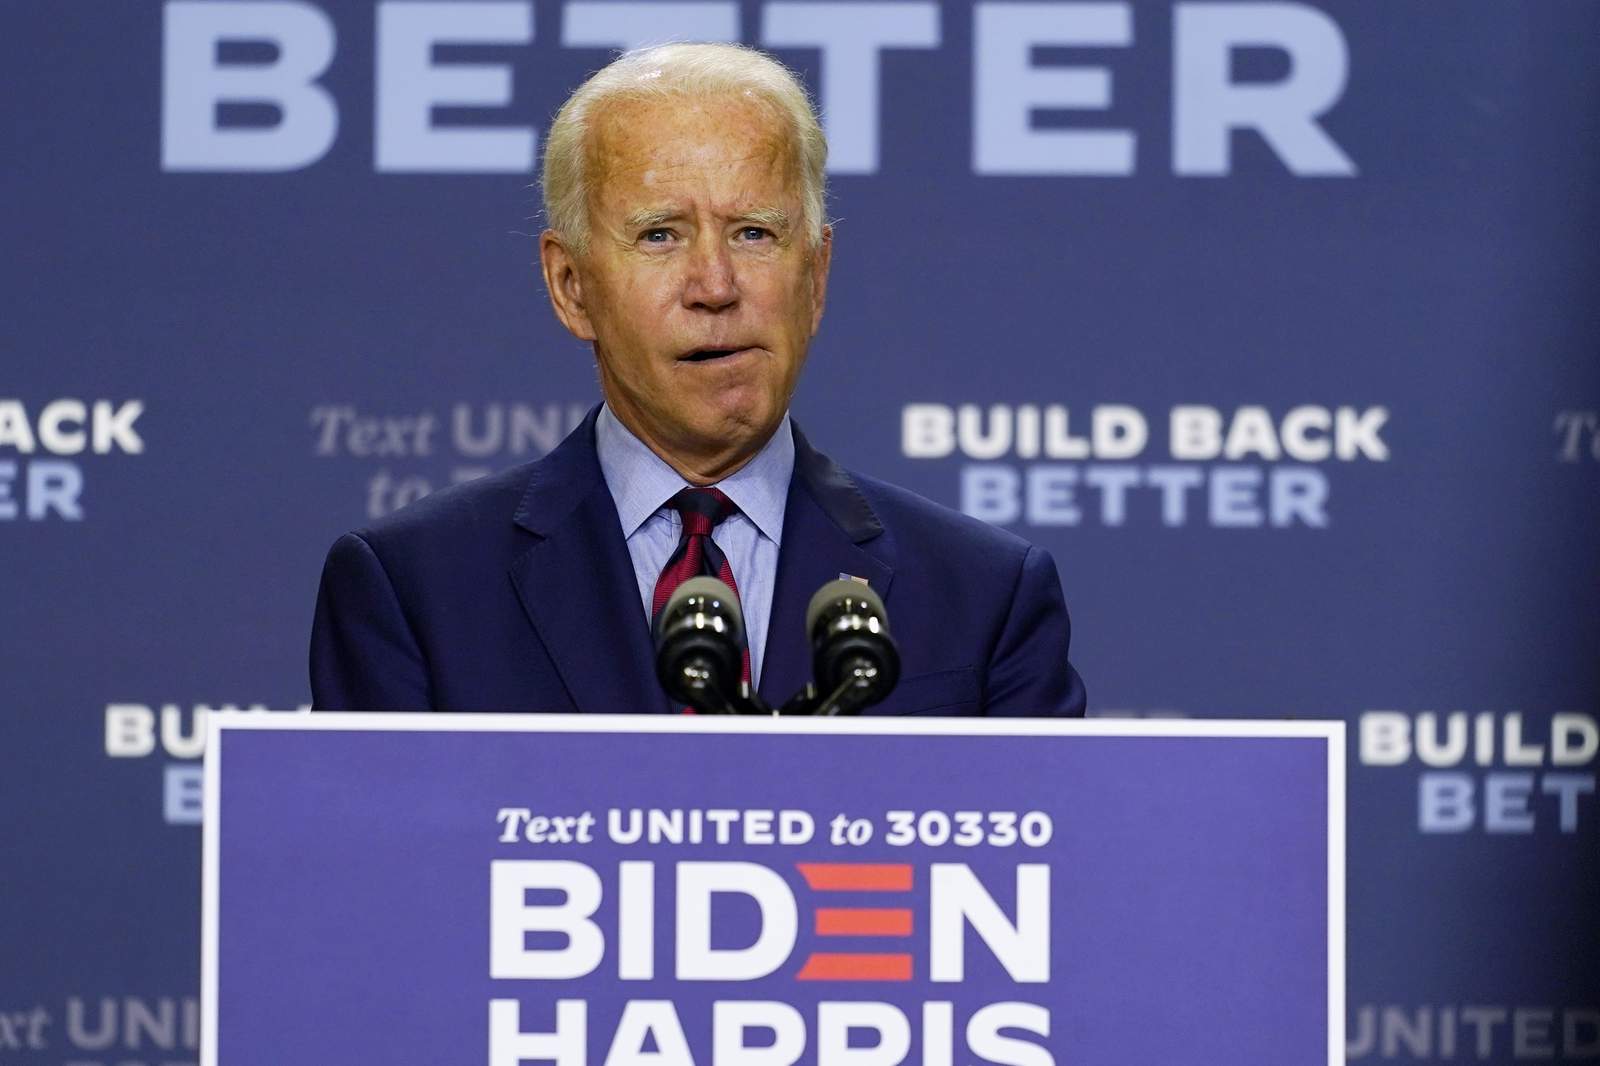 Biden confirms virus test, says he'll be tested regularly